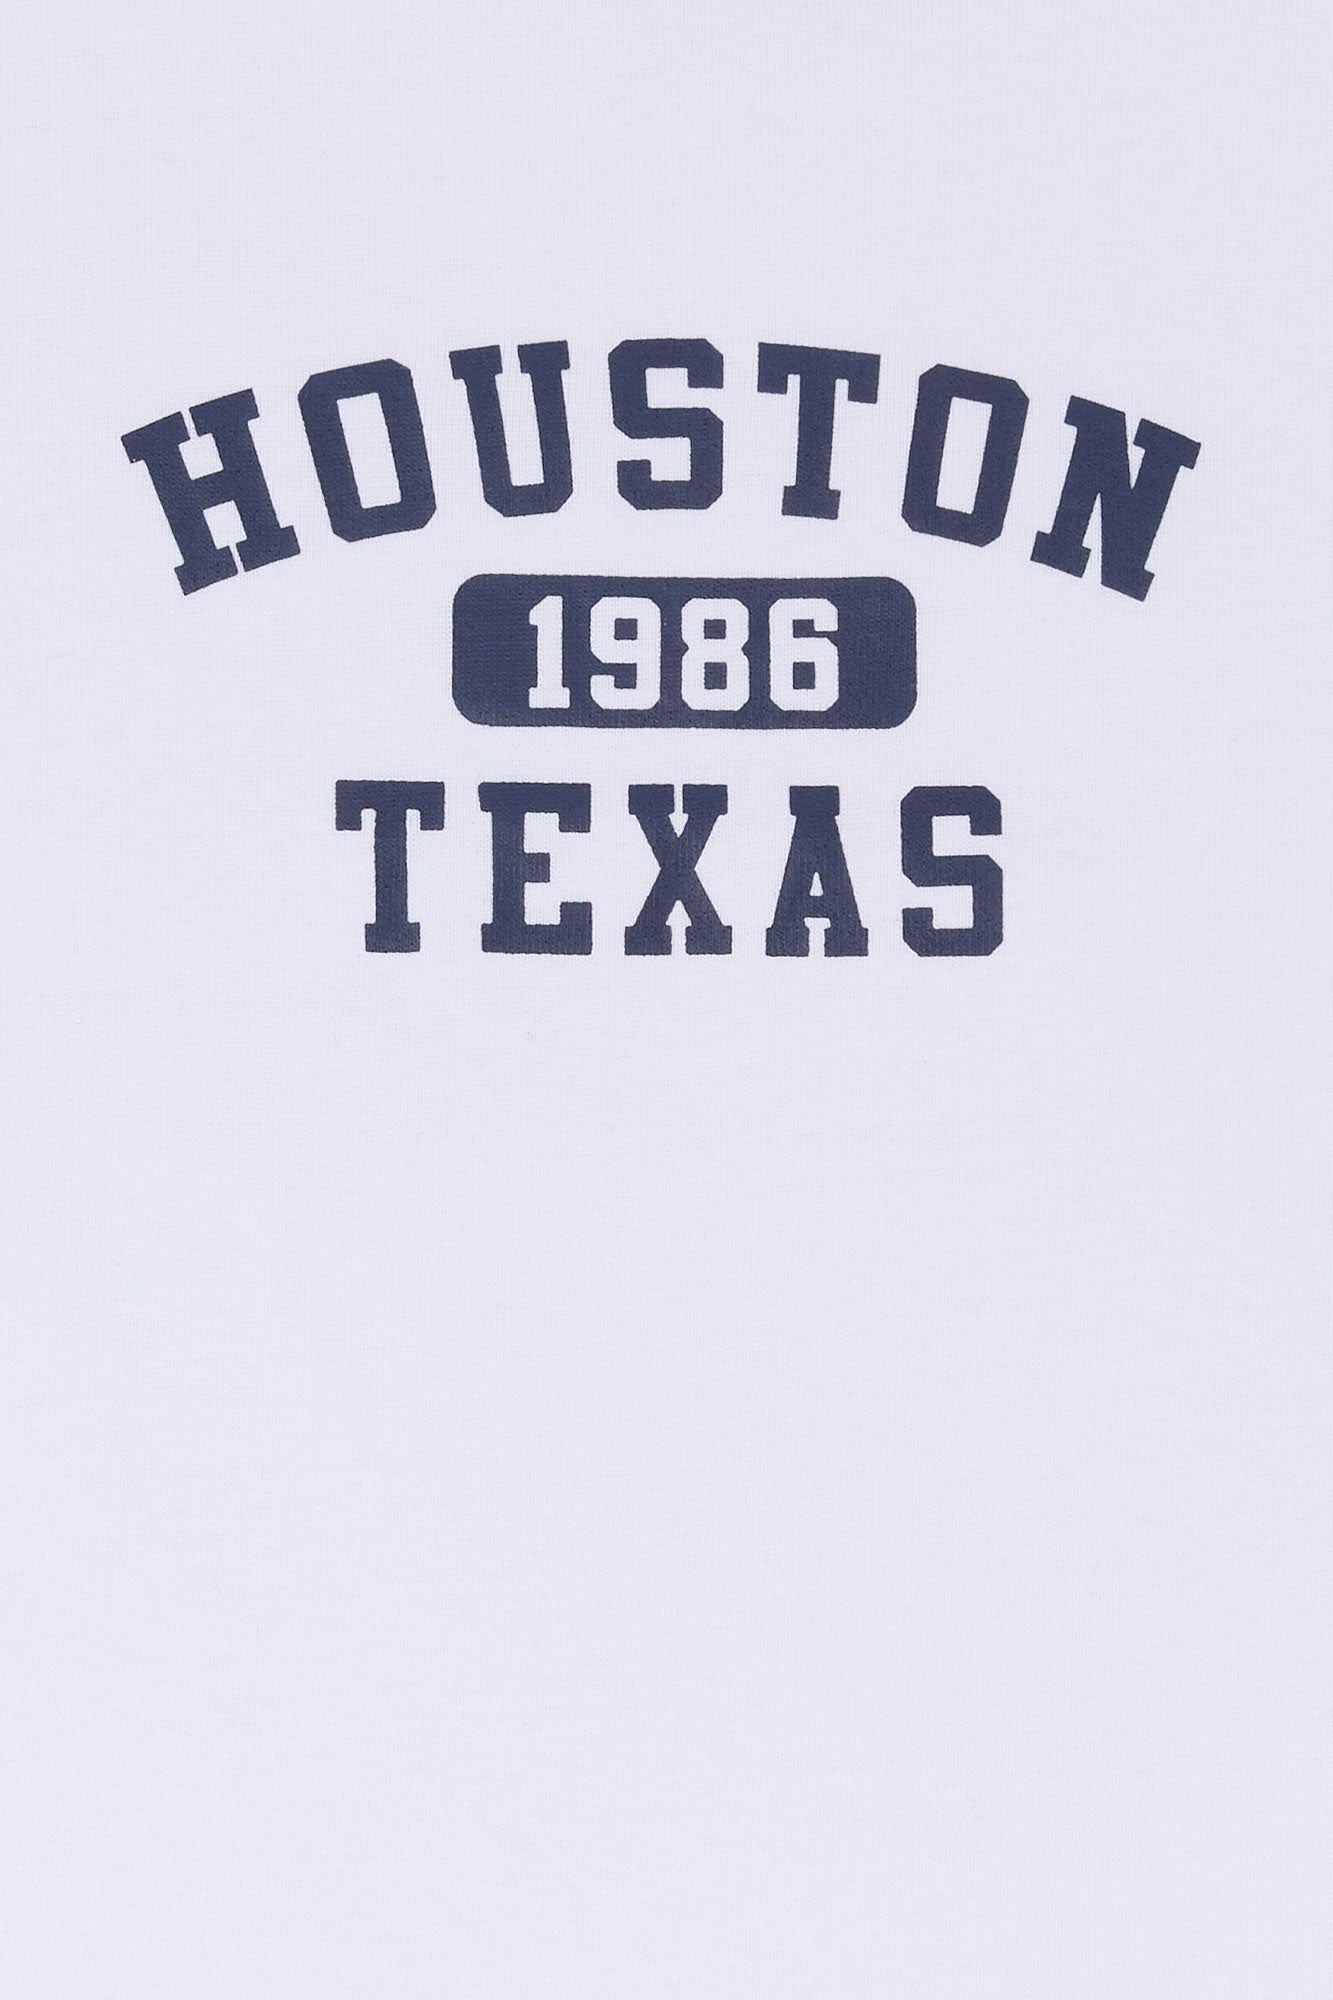 Houston Graphic Washed Cropped T-Shirt